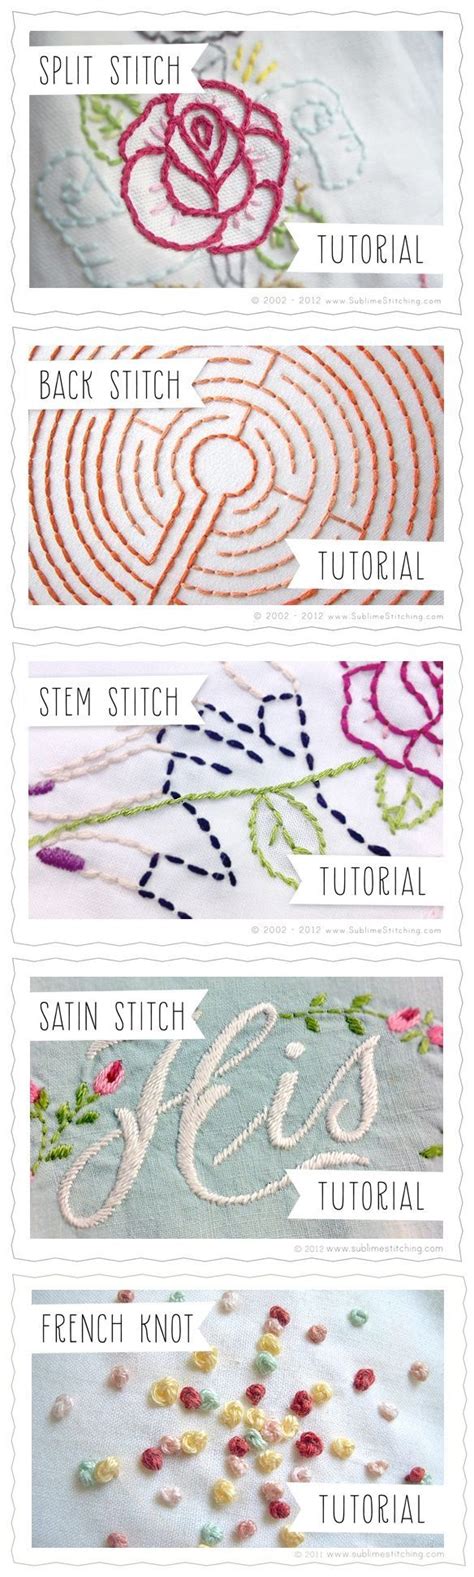 Sublime Stitching Hand Embroidery Tutorials Embroidery Patterns